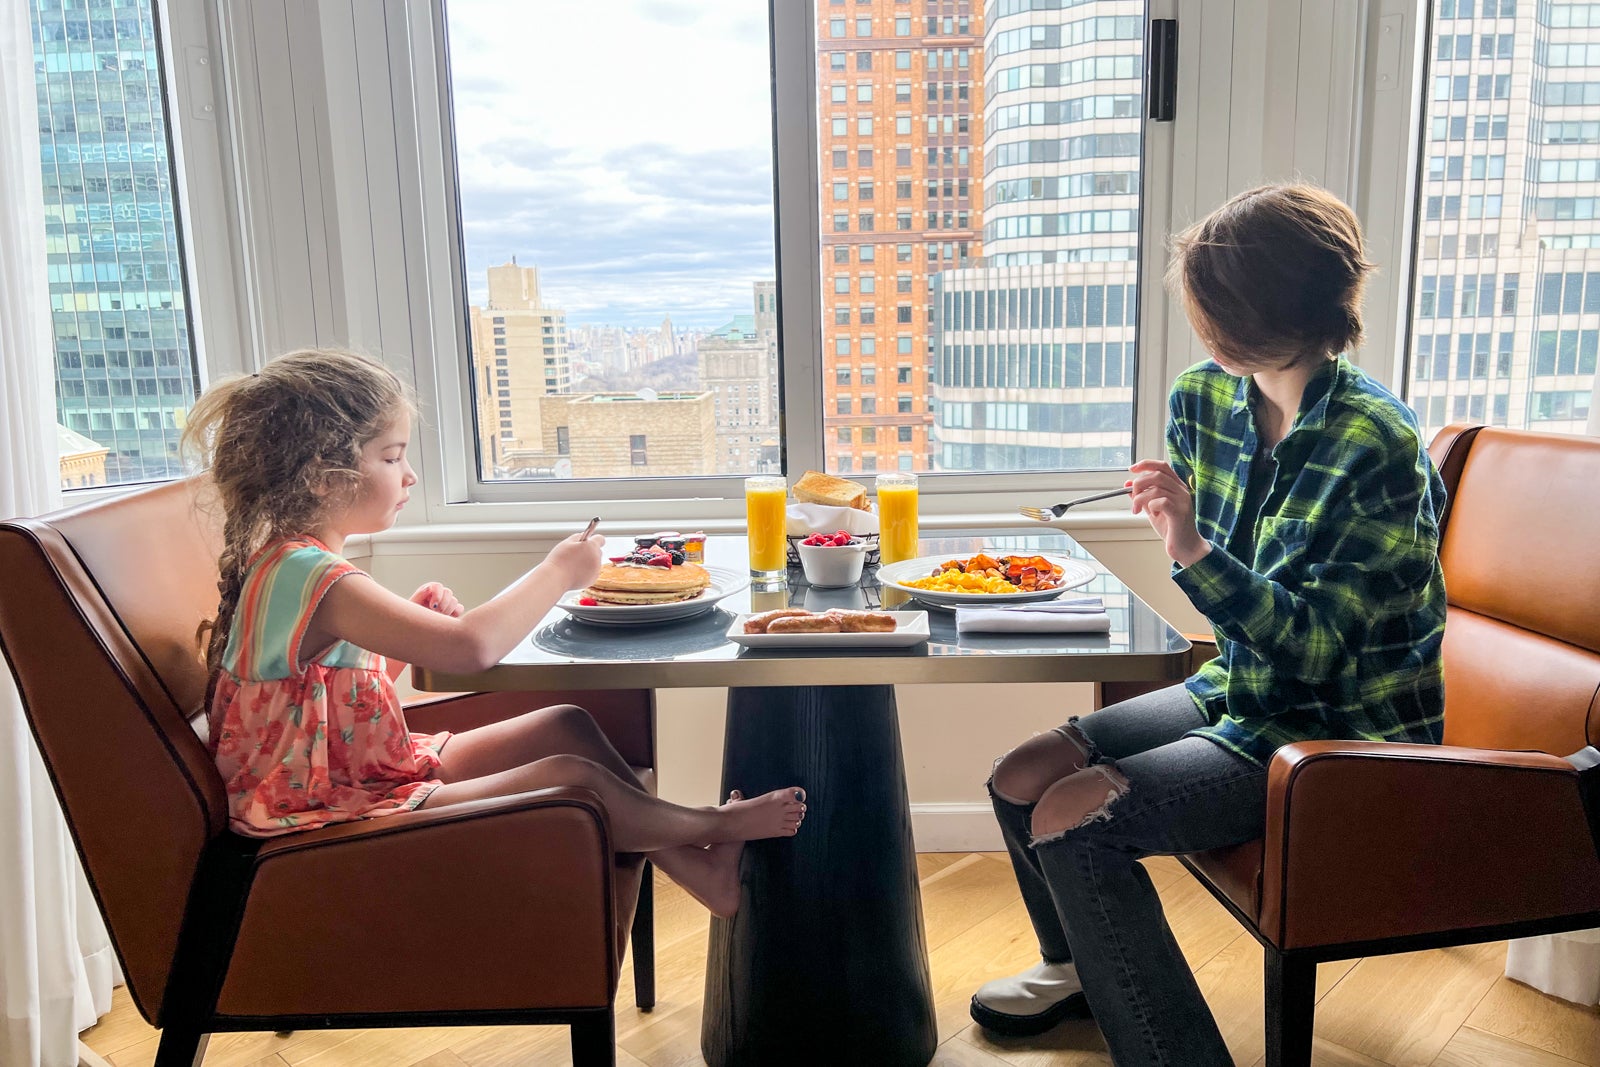 Two kids at a breakfast table at a hotel